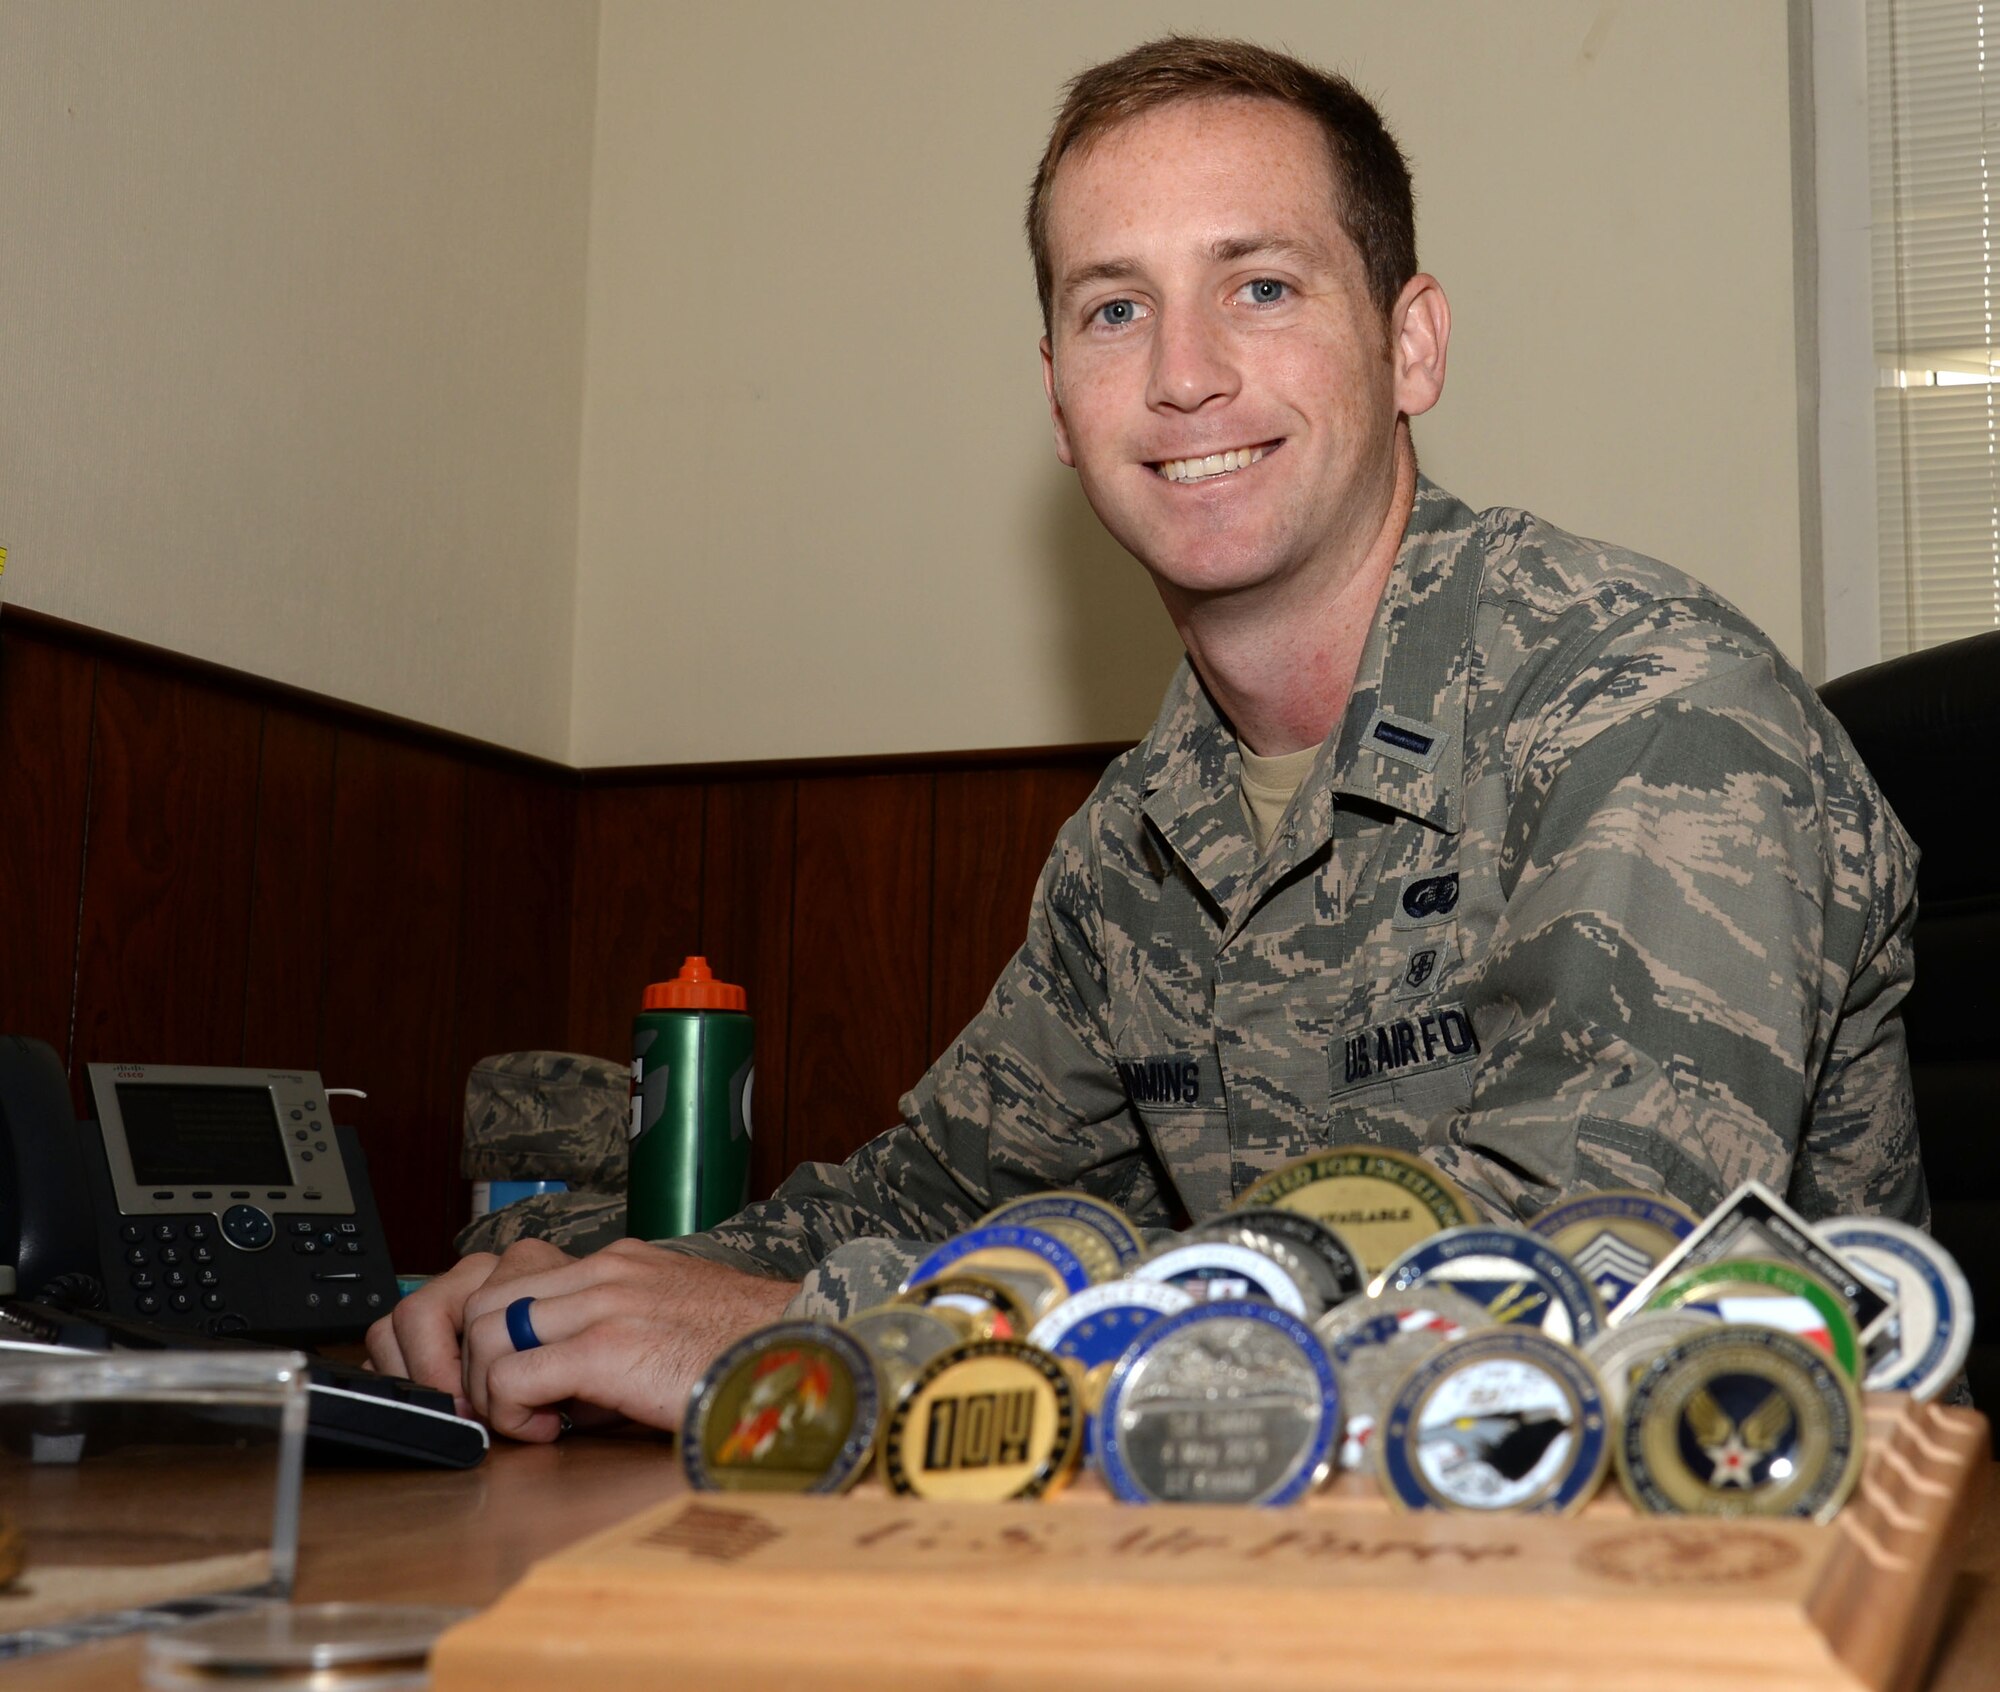 U.S. Air Force 1st Lt. Micah Cummins, 100th Air Refueling Wing chief of protocol, poses for a photograph in his office Aug. 3, 2016, on RAF Mildenhall, England. Cummins’ father was a coach for youth soccer at night and he taught his son a sport that he still enjoys many years later. (U.S. Air Force photo by Gina Randall)